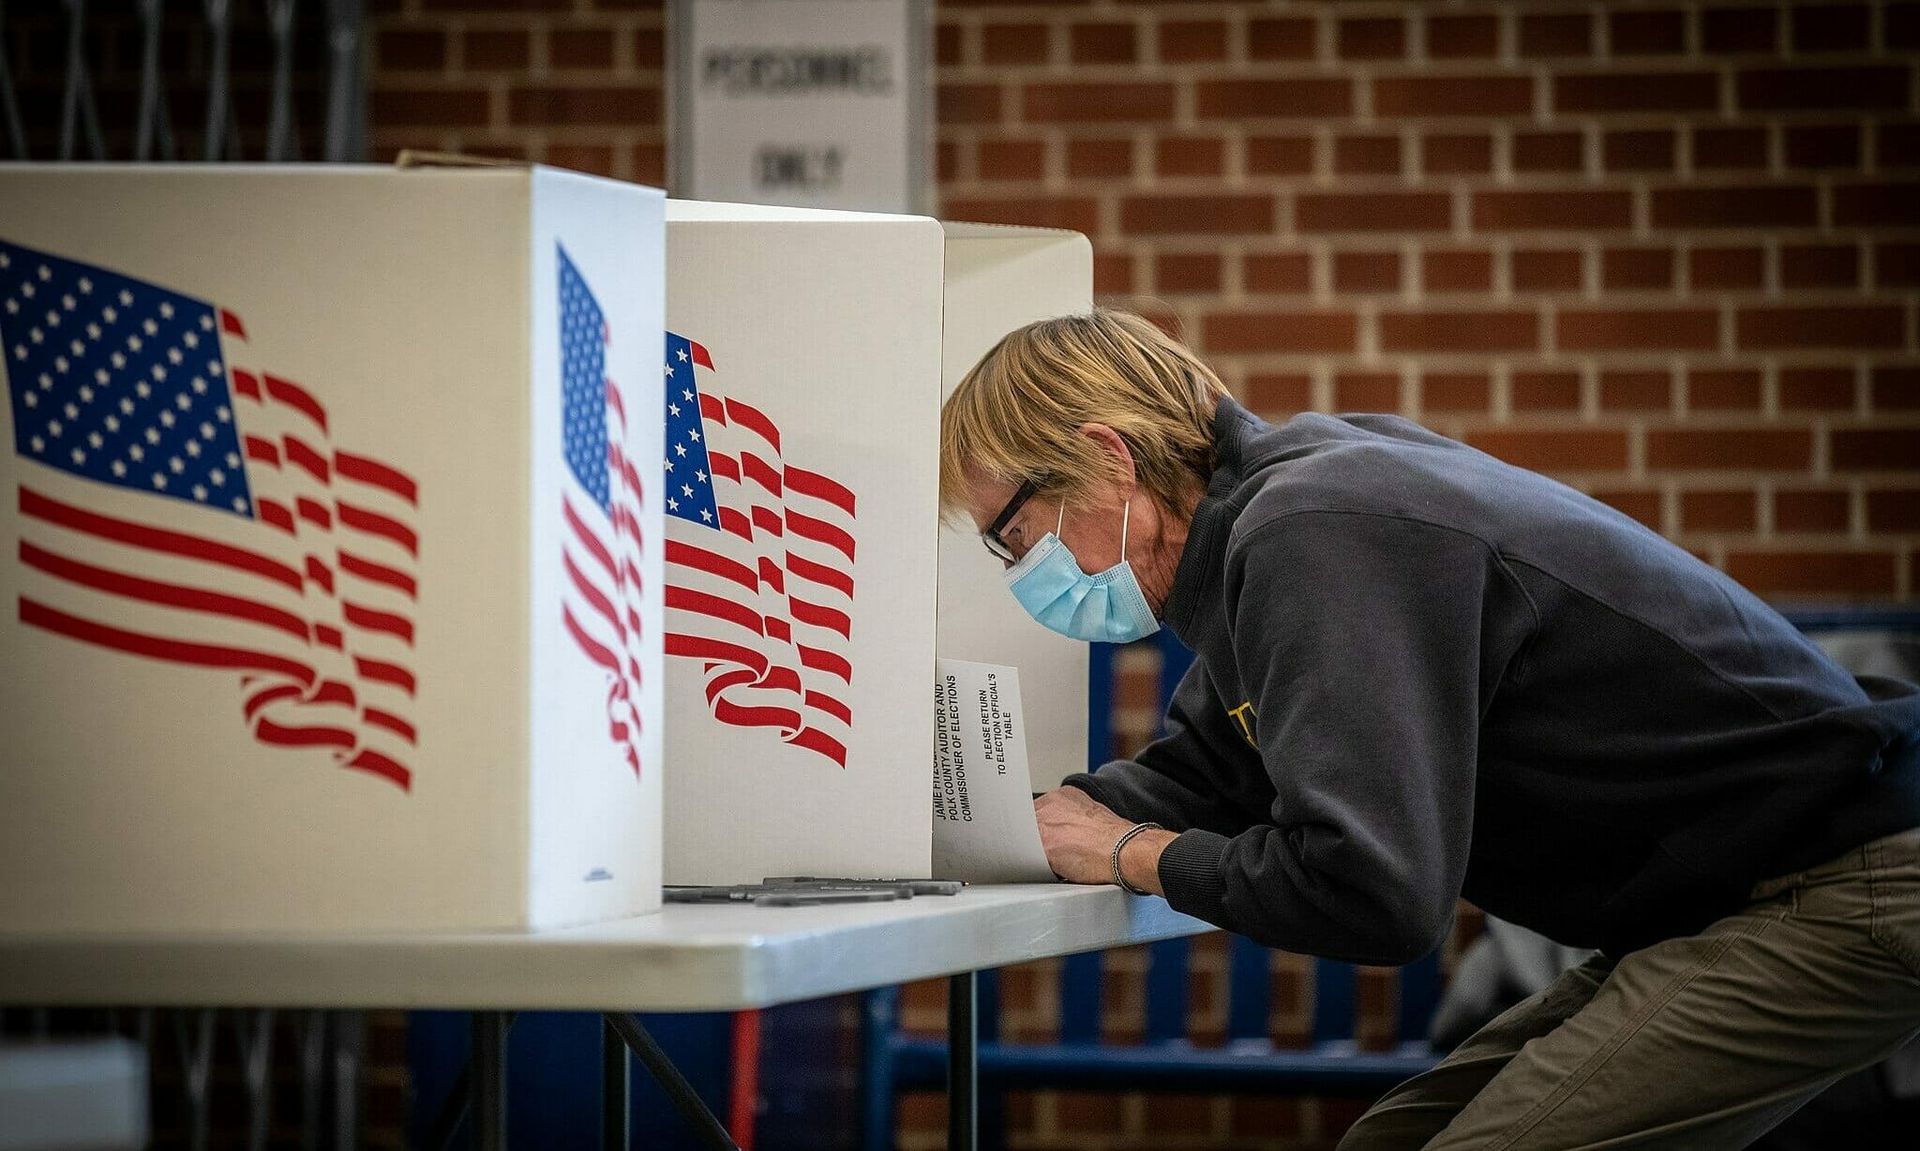 Voters in Des Moines cast their ballots at Roosevelt High School. (Phil Roeder/CC BY 2.0)